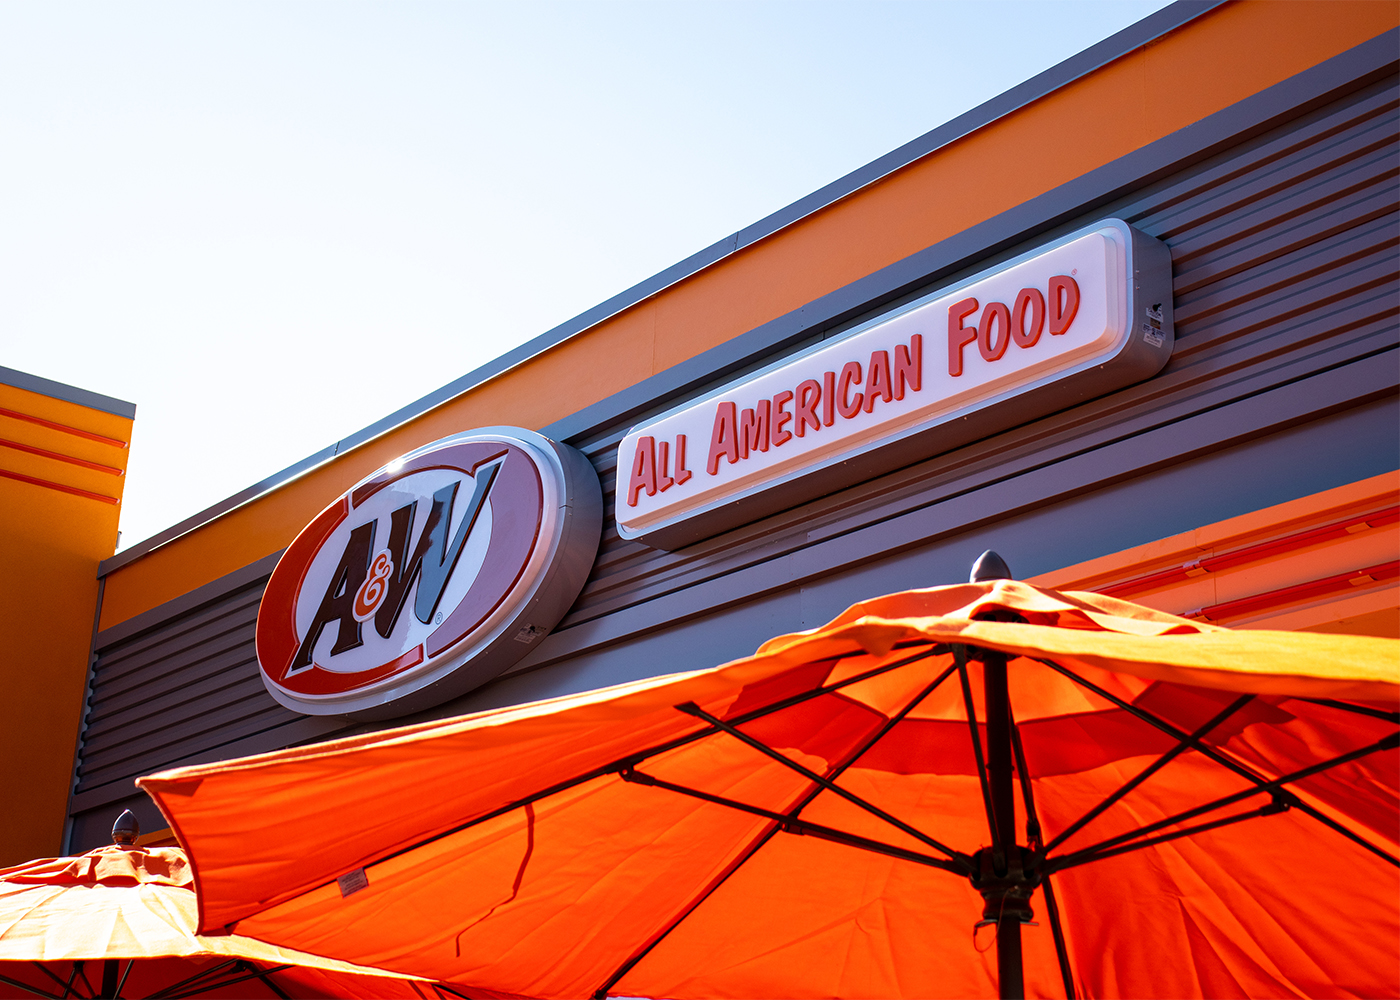 Exterior photo of the top of A&W Restaurant sign with an orange umbrella in the foreground.